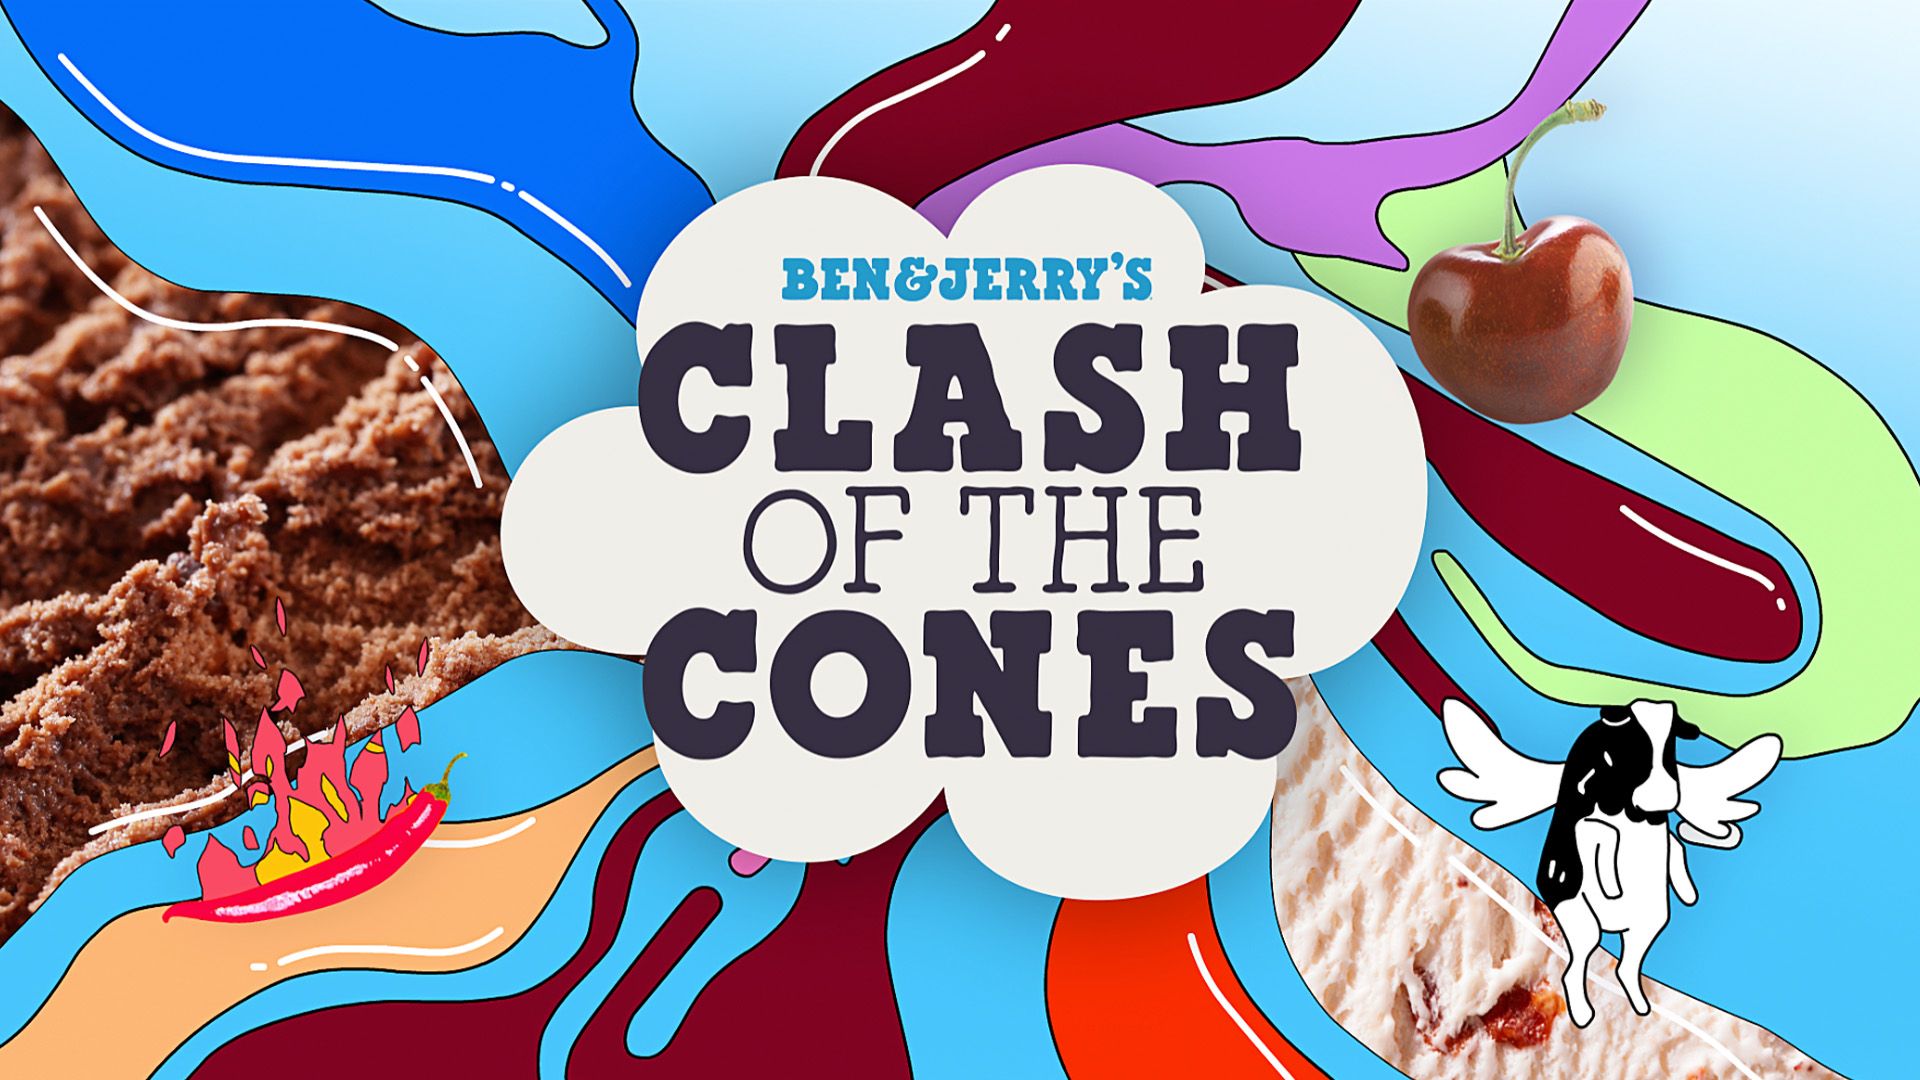 Ben & Jerry's Clash of the Cones background